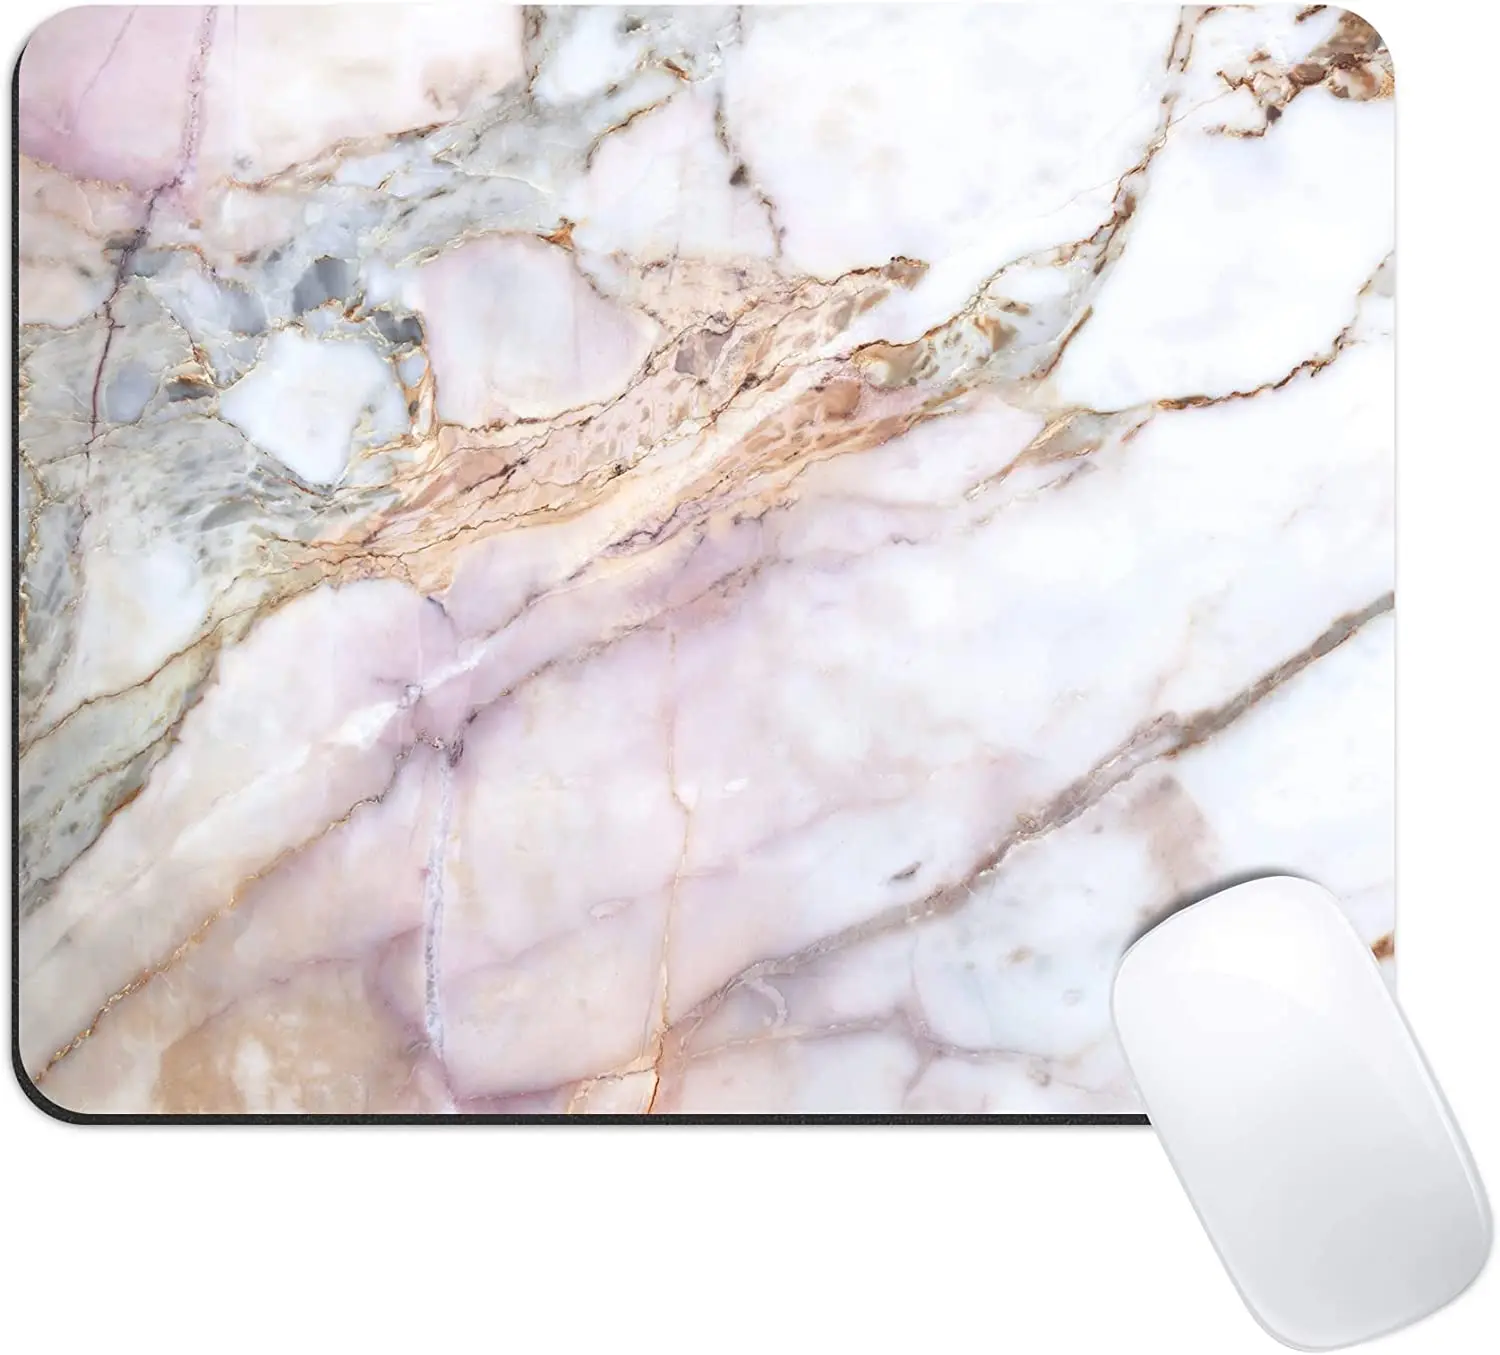 

Upgraded Mouse Pad Gaming Mouse Pads Non-Slip Rubber Base Mousepad Rectangular Mouse Mat 11.8x9.8x0.12 Inches Pink Marble